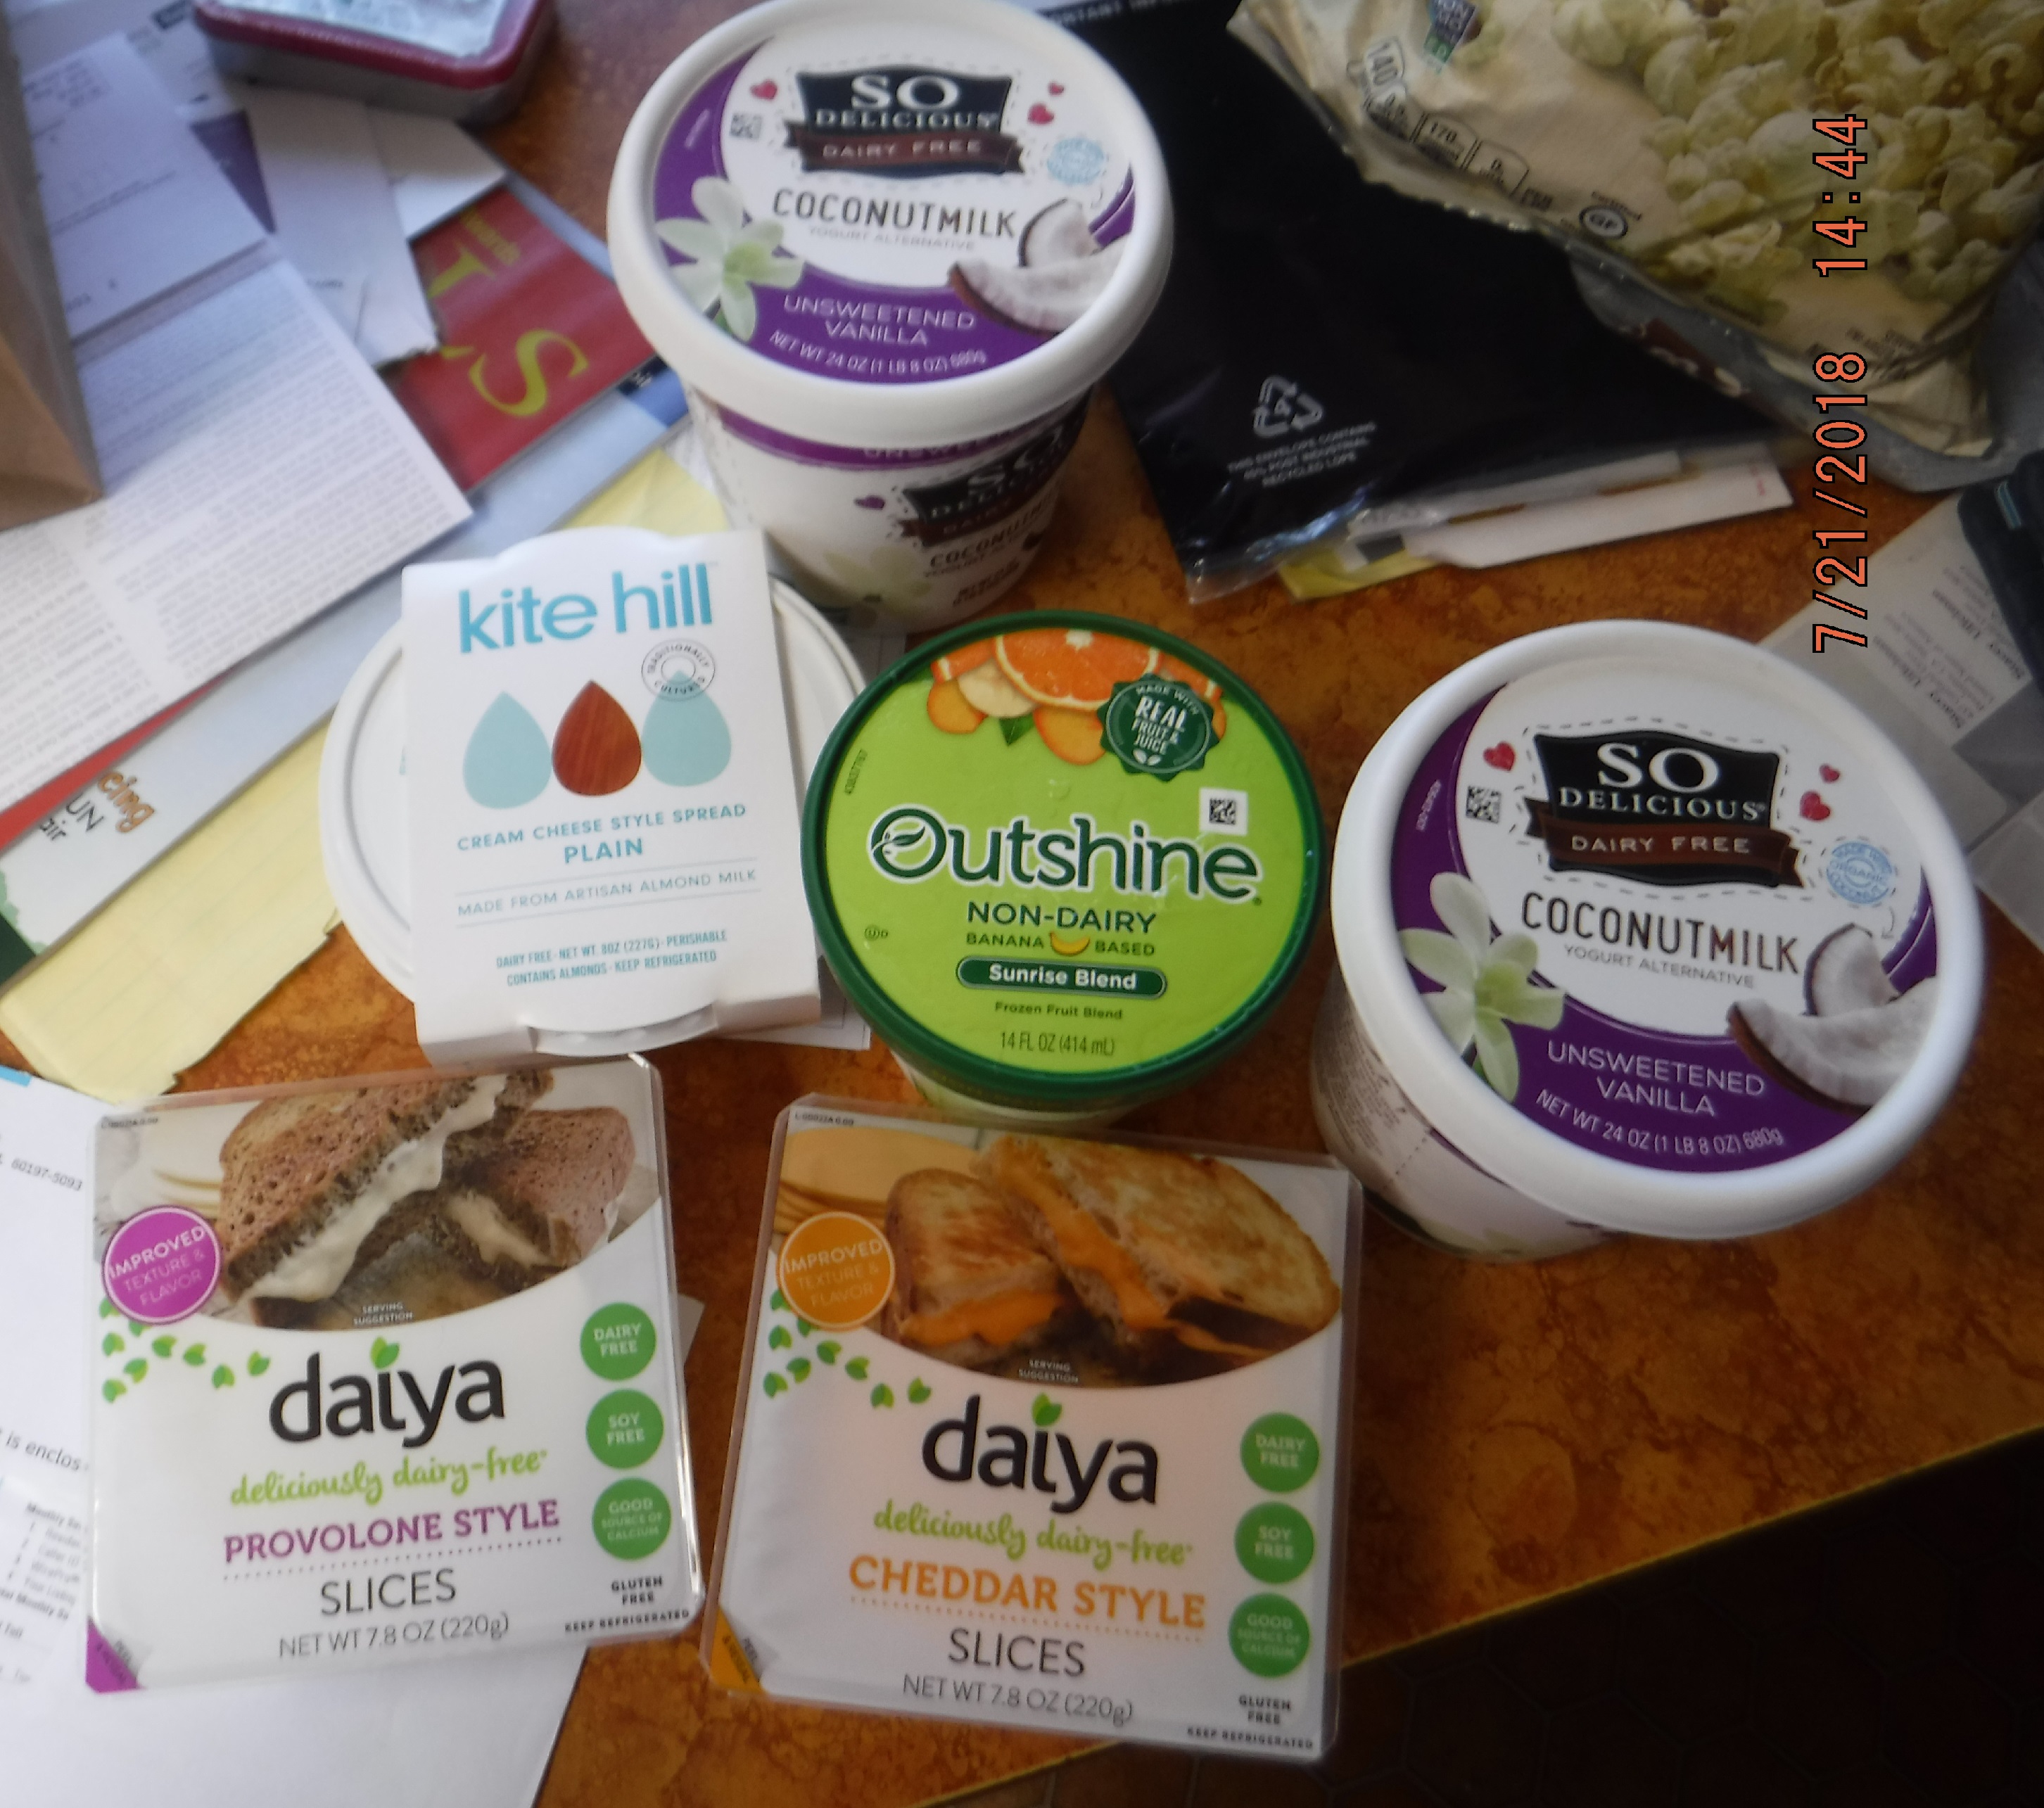 A photo I took of the non-dairy products that I bought today